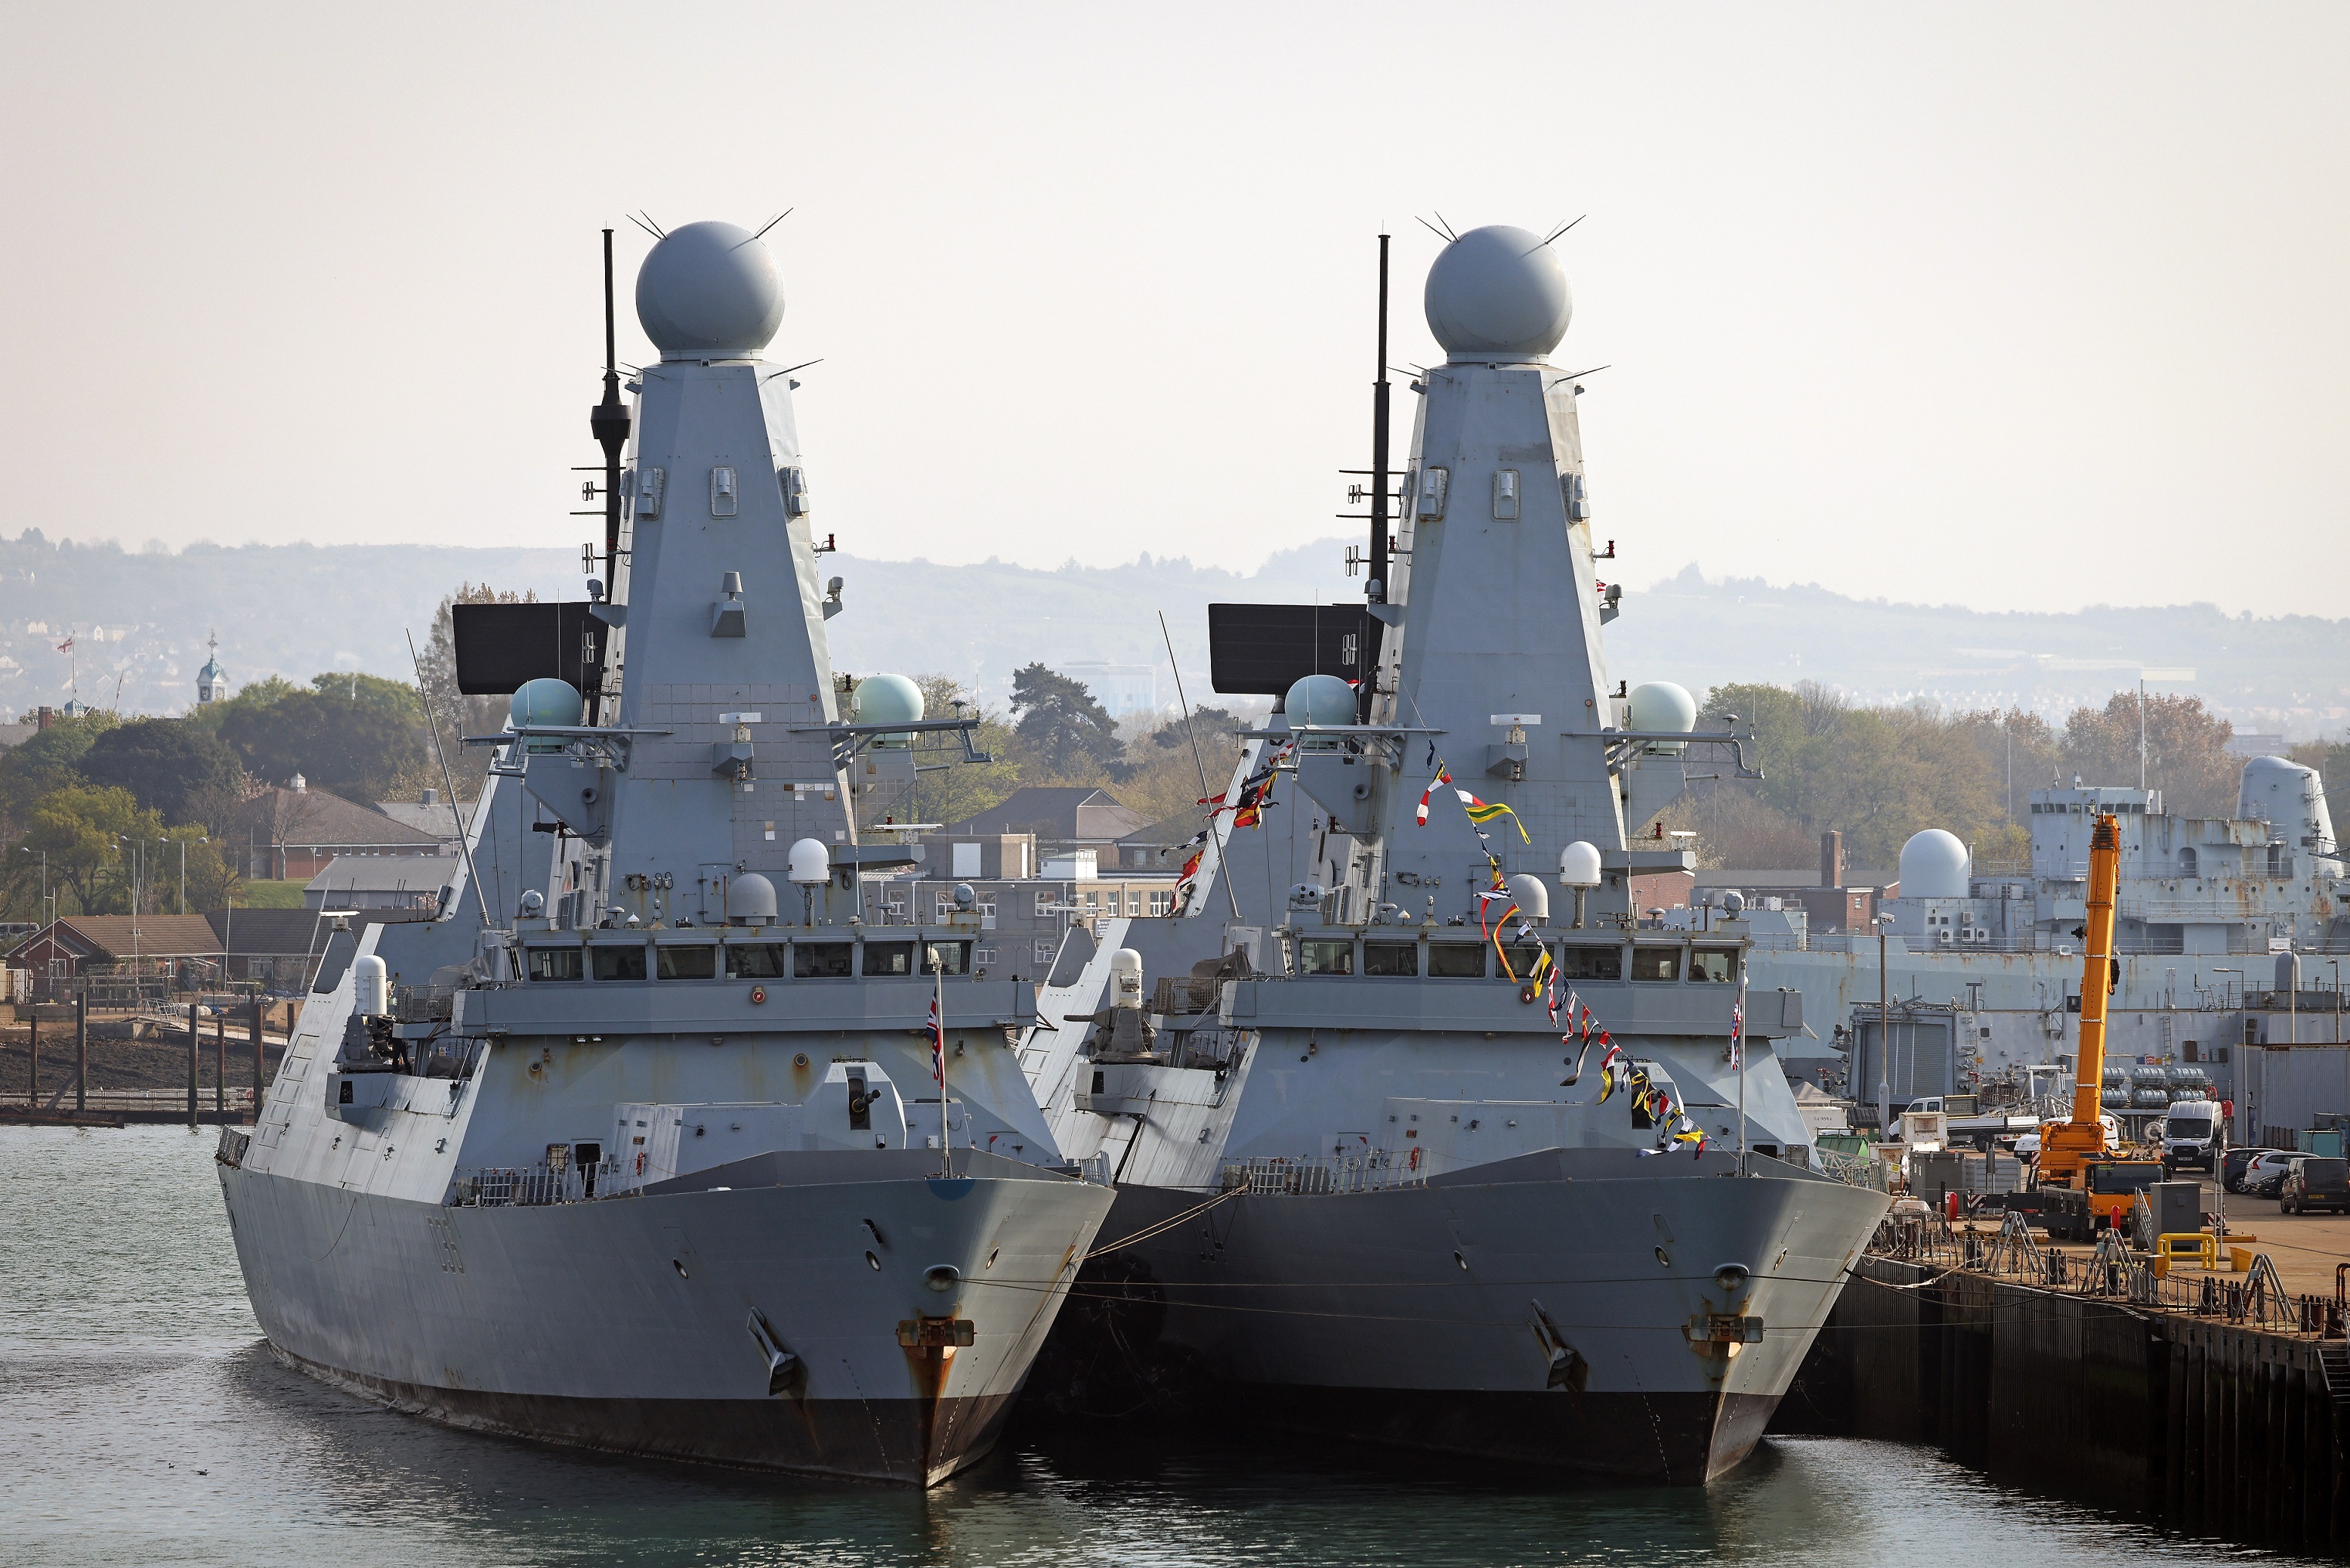 HMS Diamond and HMS Defender (left) The Queen Celebrates her 96th Birthday.